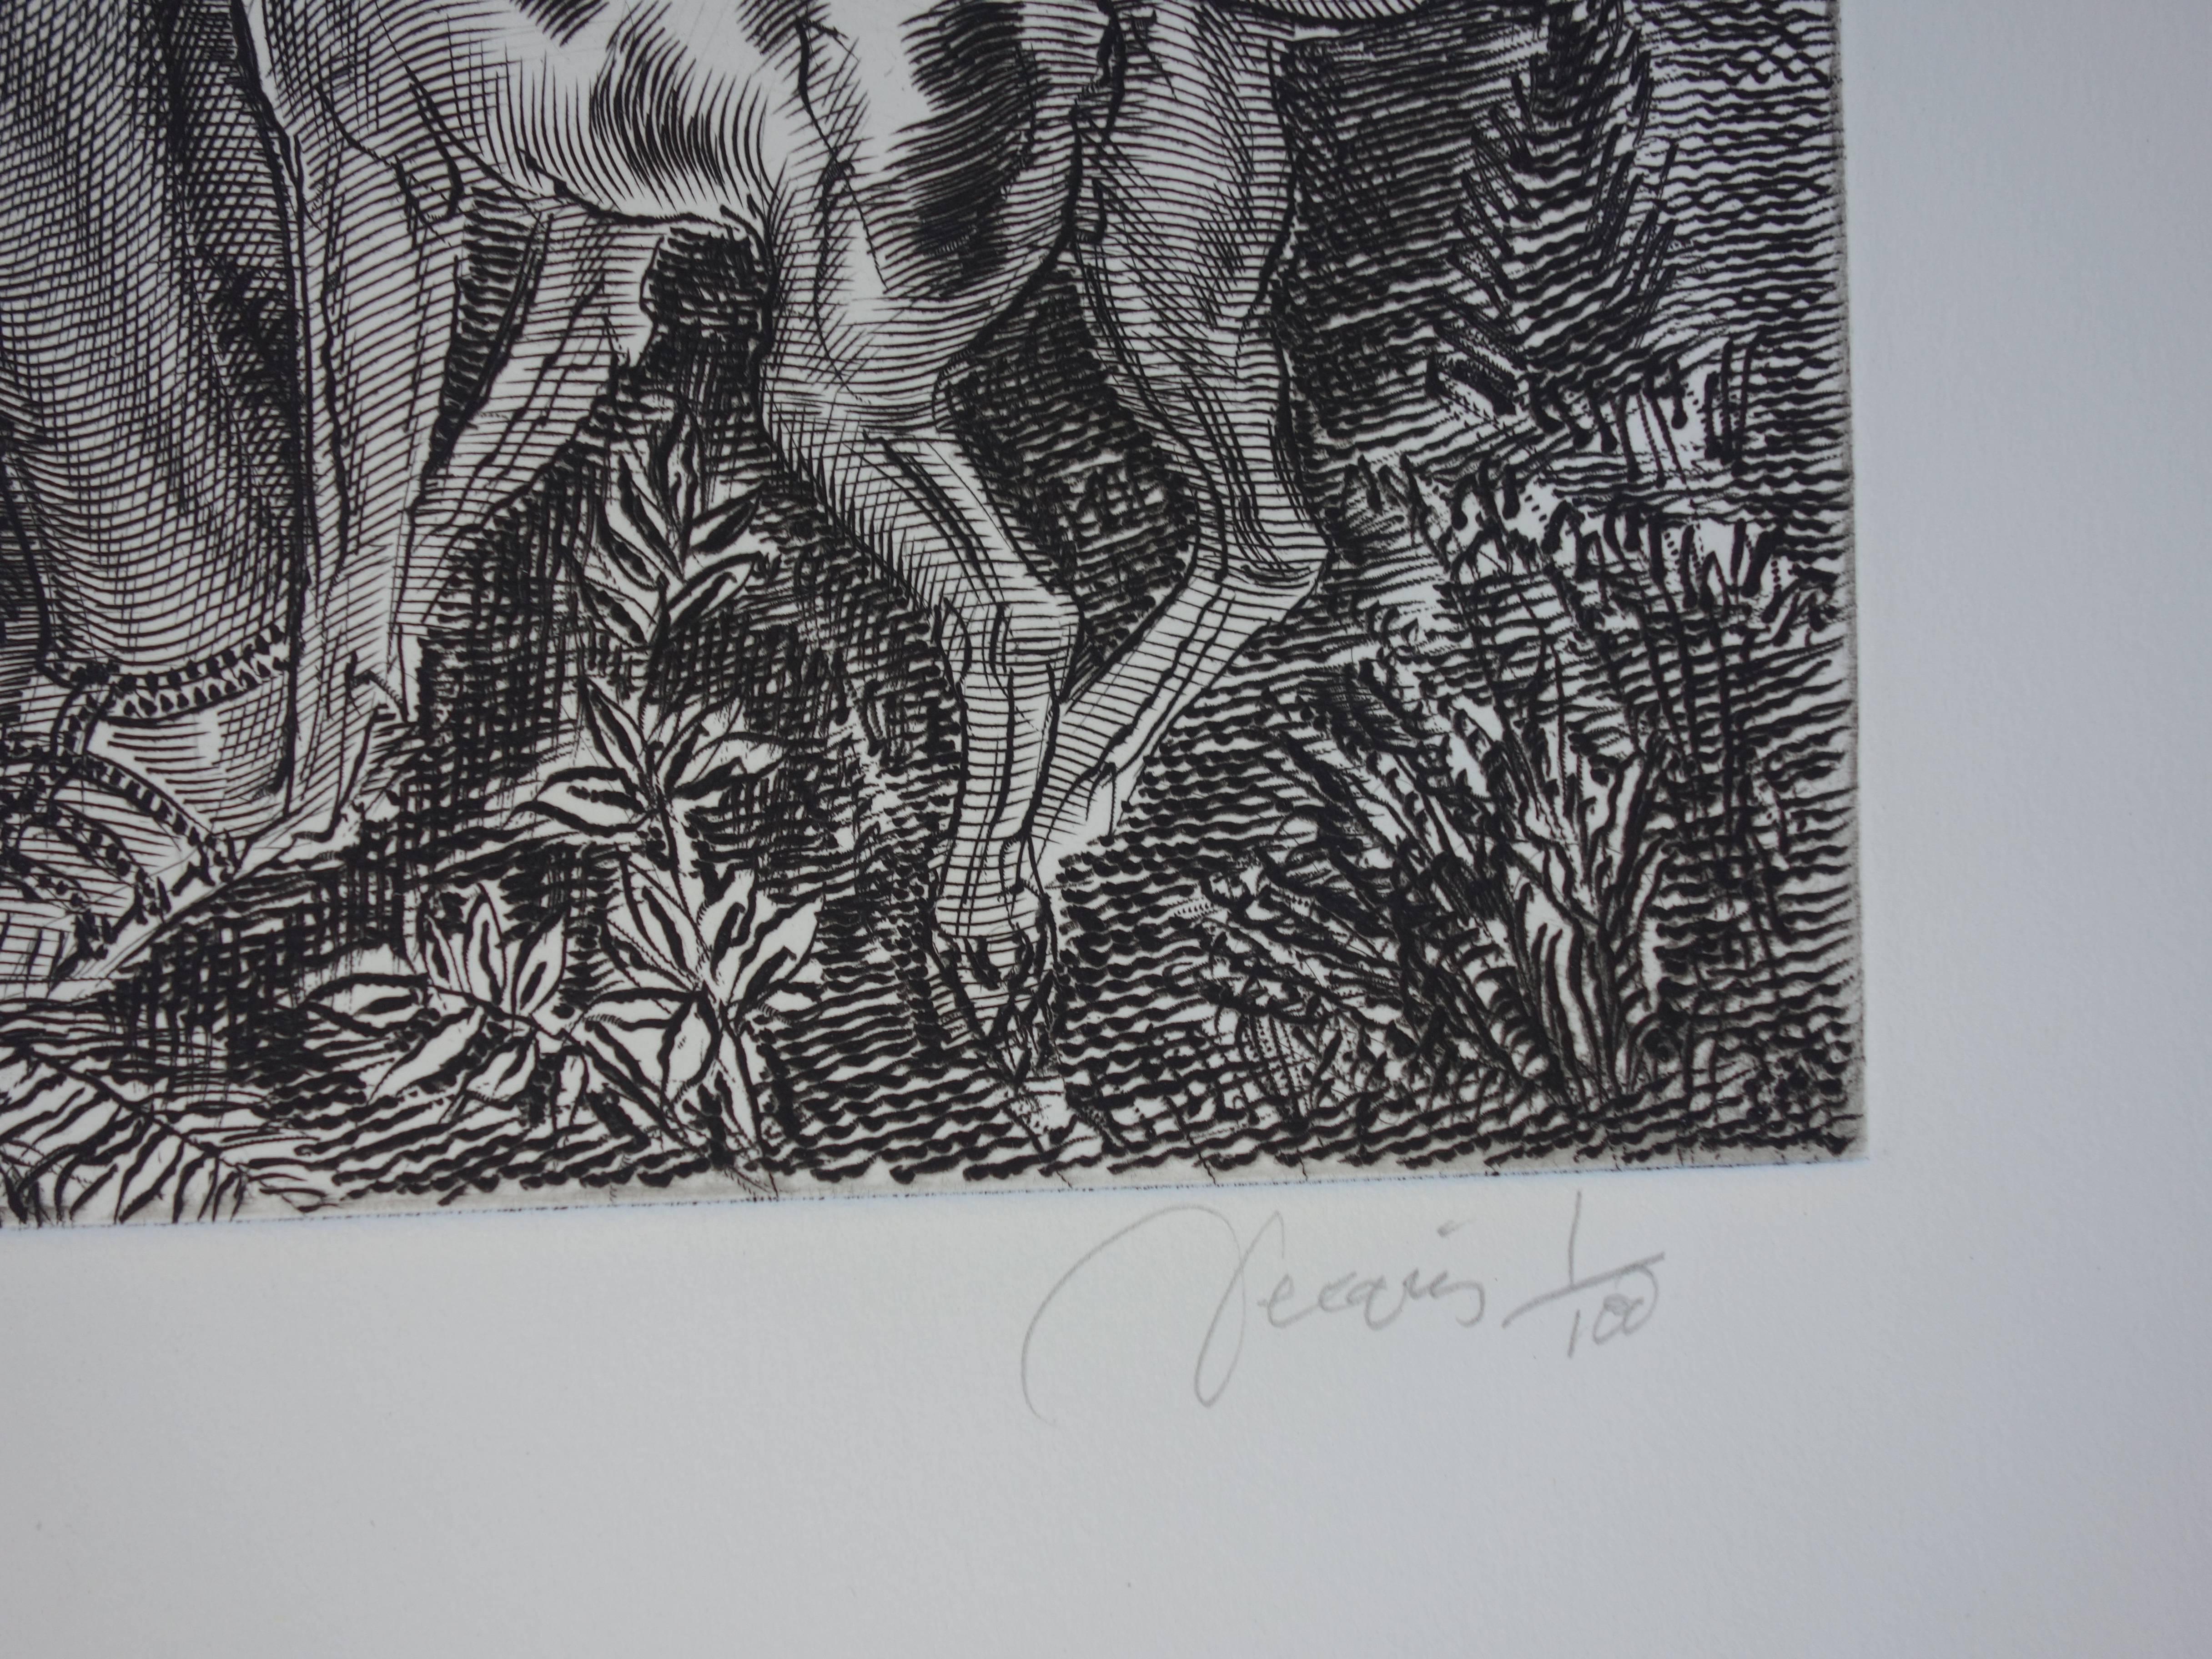 October : Diane the Huntress - Original handsigned etching - Exceptional n°1/100 - Print by Albert Decaris